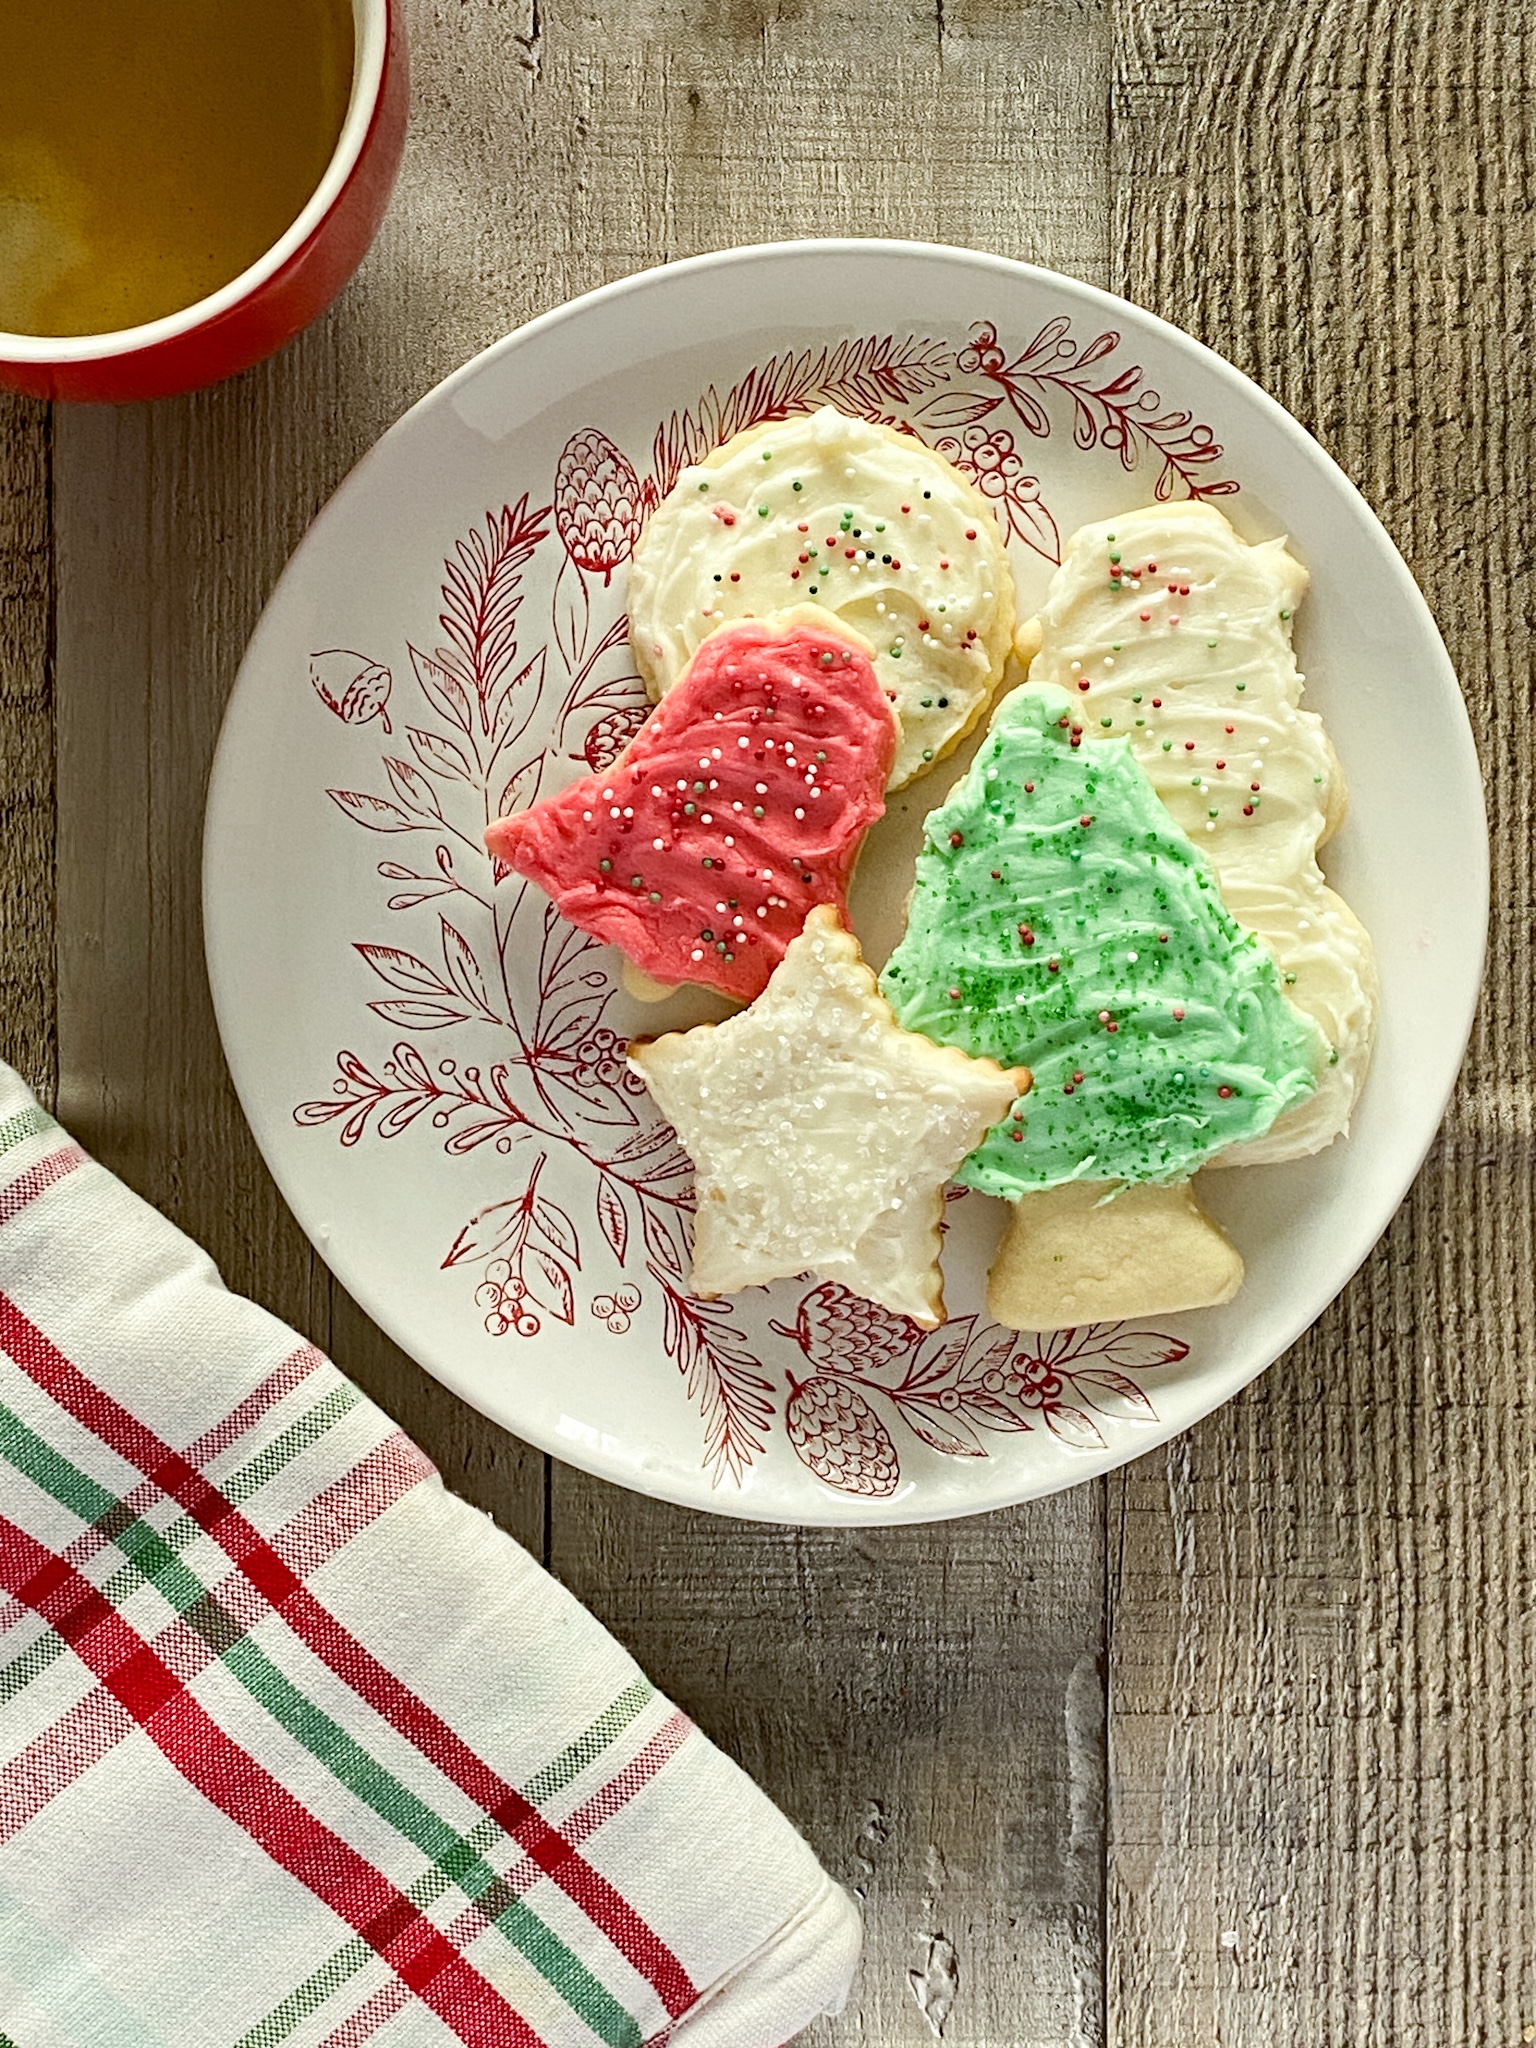 Sugar cookies cut in holiday shapes and decorated with colored frosting on a Christmas plate.